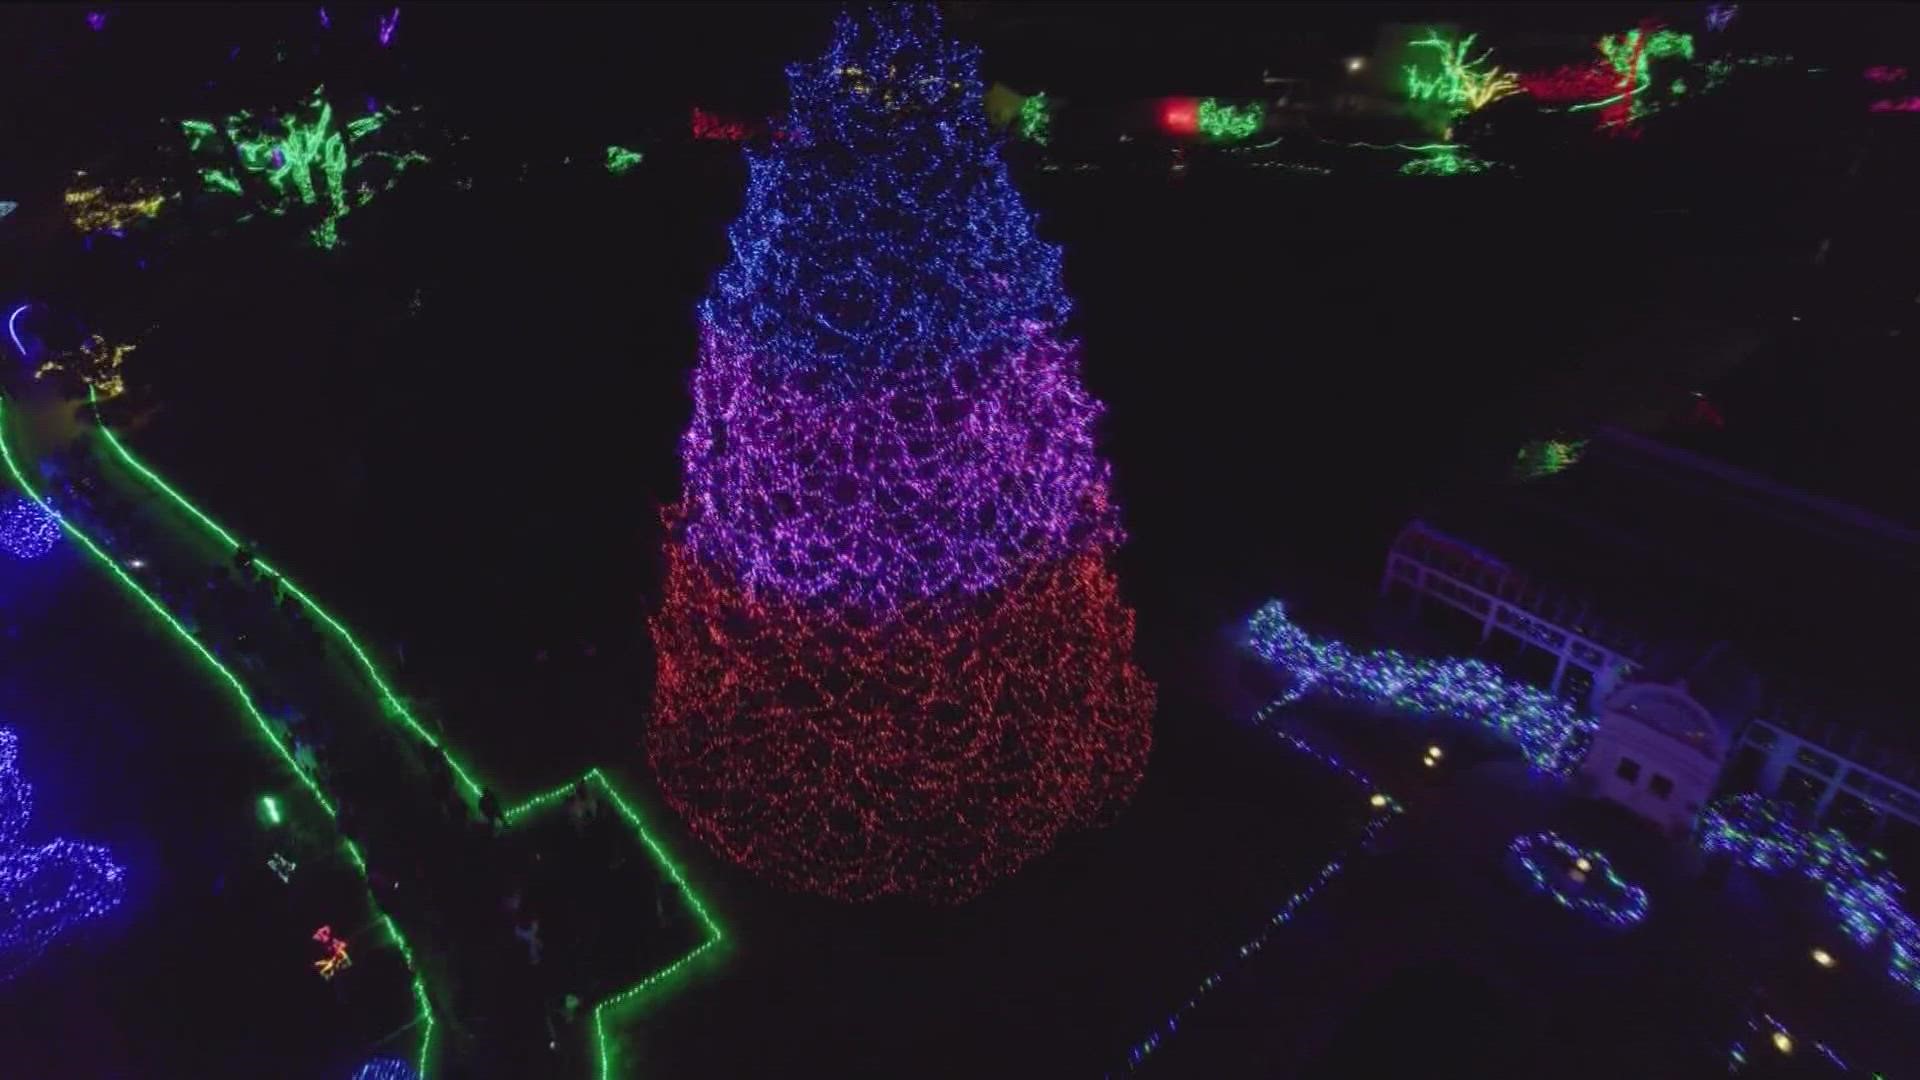 The Toledo Zoo will kick off its 37th Lights Before Christmas celebration with the ceremonial lighting of the 85-foot Norway Spruce at 6:10 p.m. on Friday.